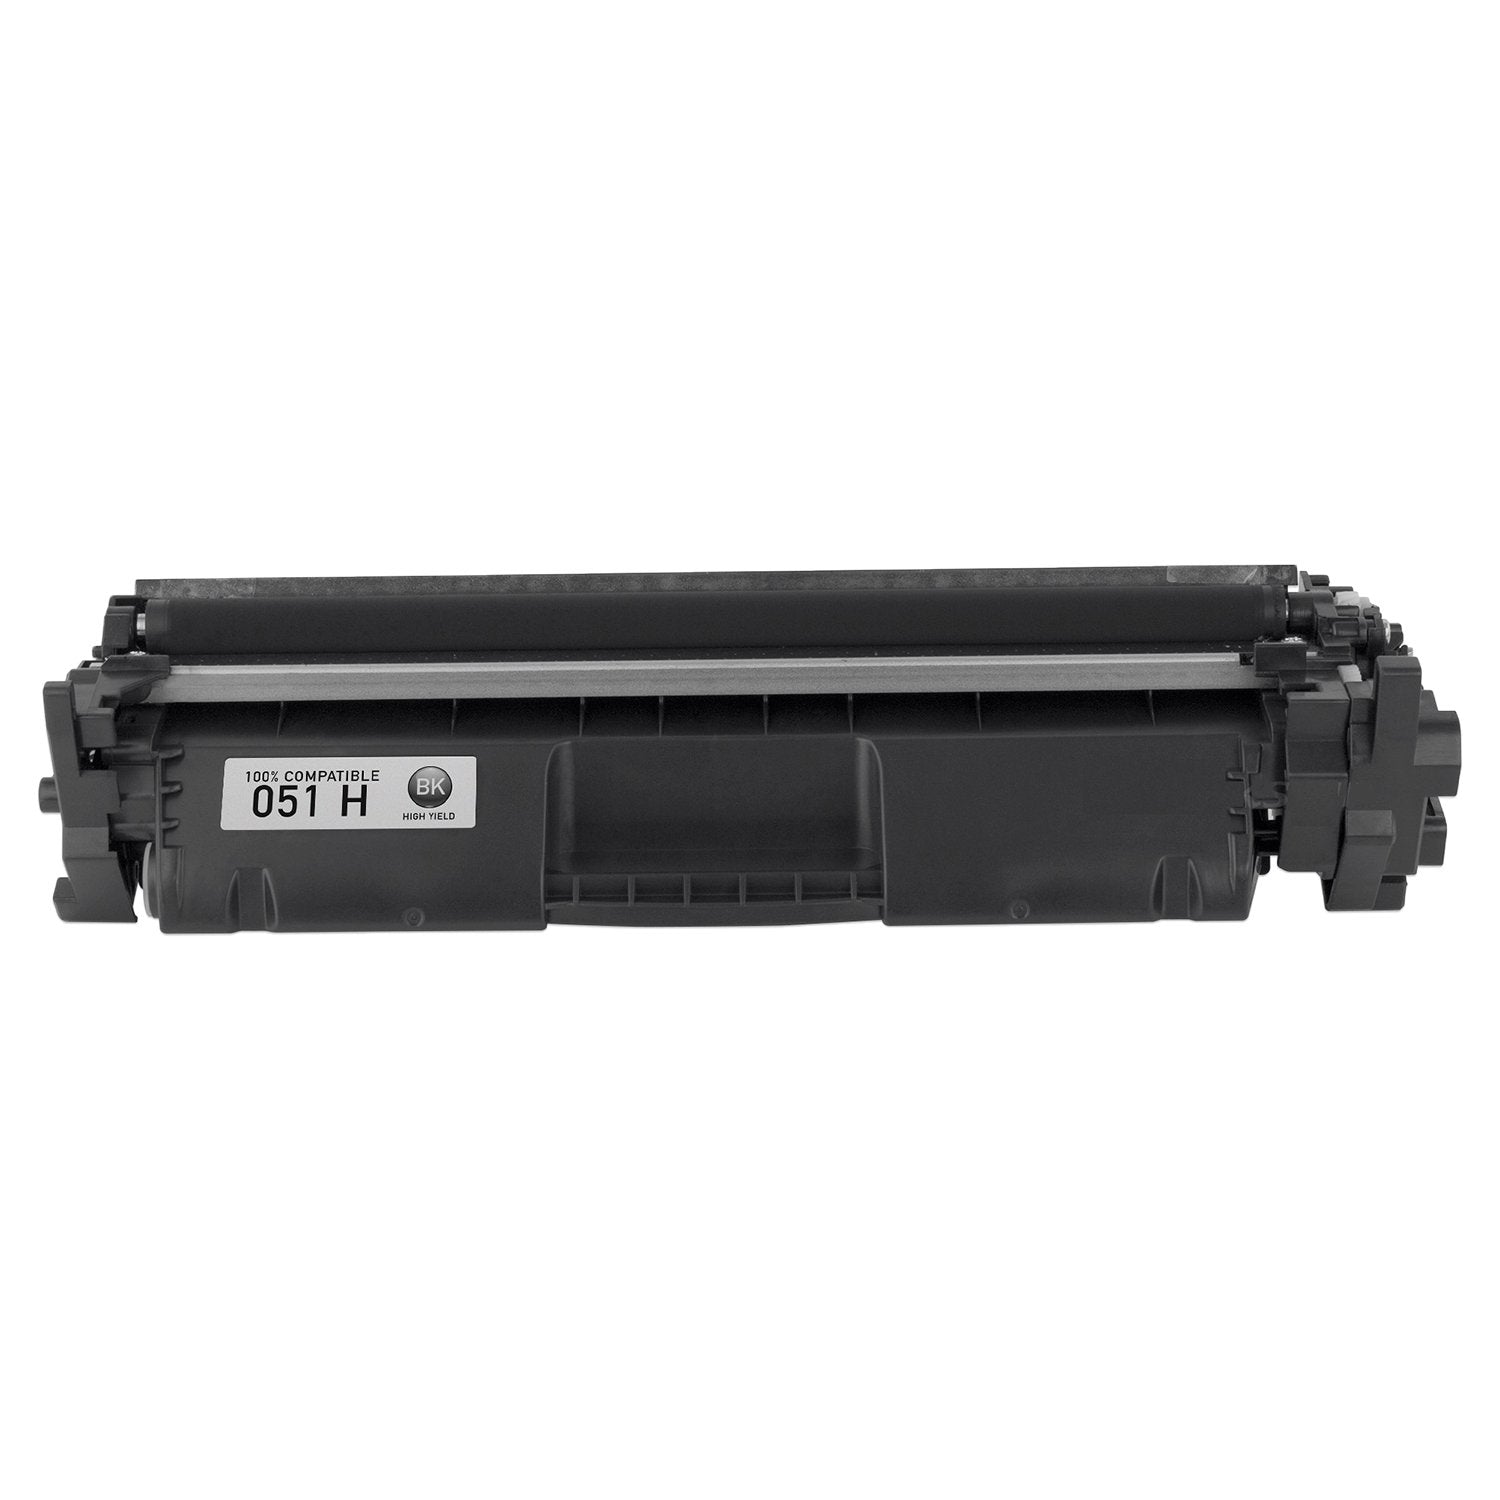 Absolute Toner Compatible Canon 051H Black High Yield Toner Cartridge | Absolute Toner Canon Toner Cartridges